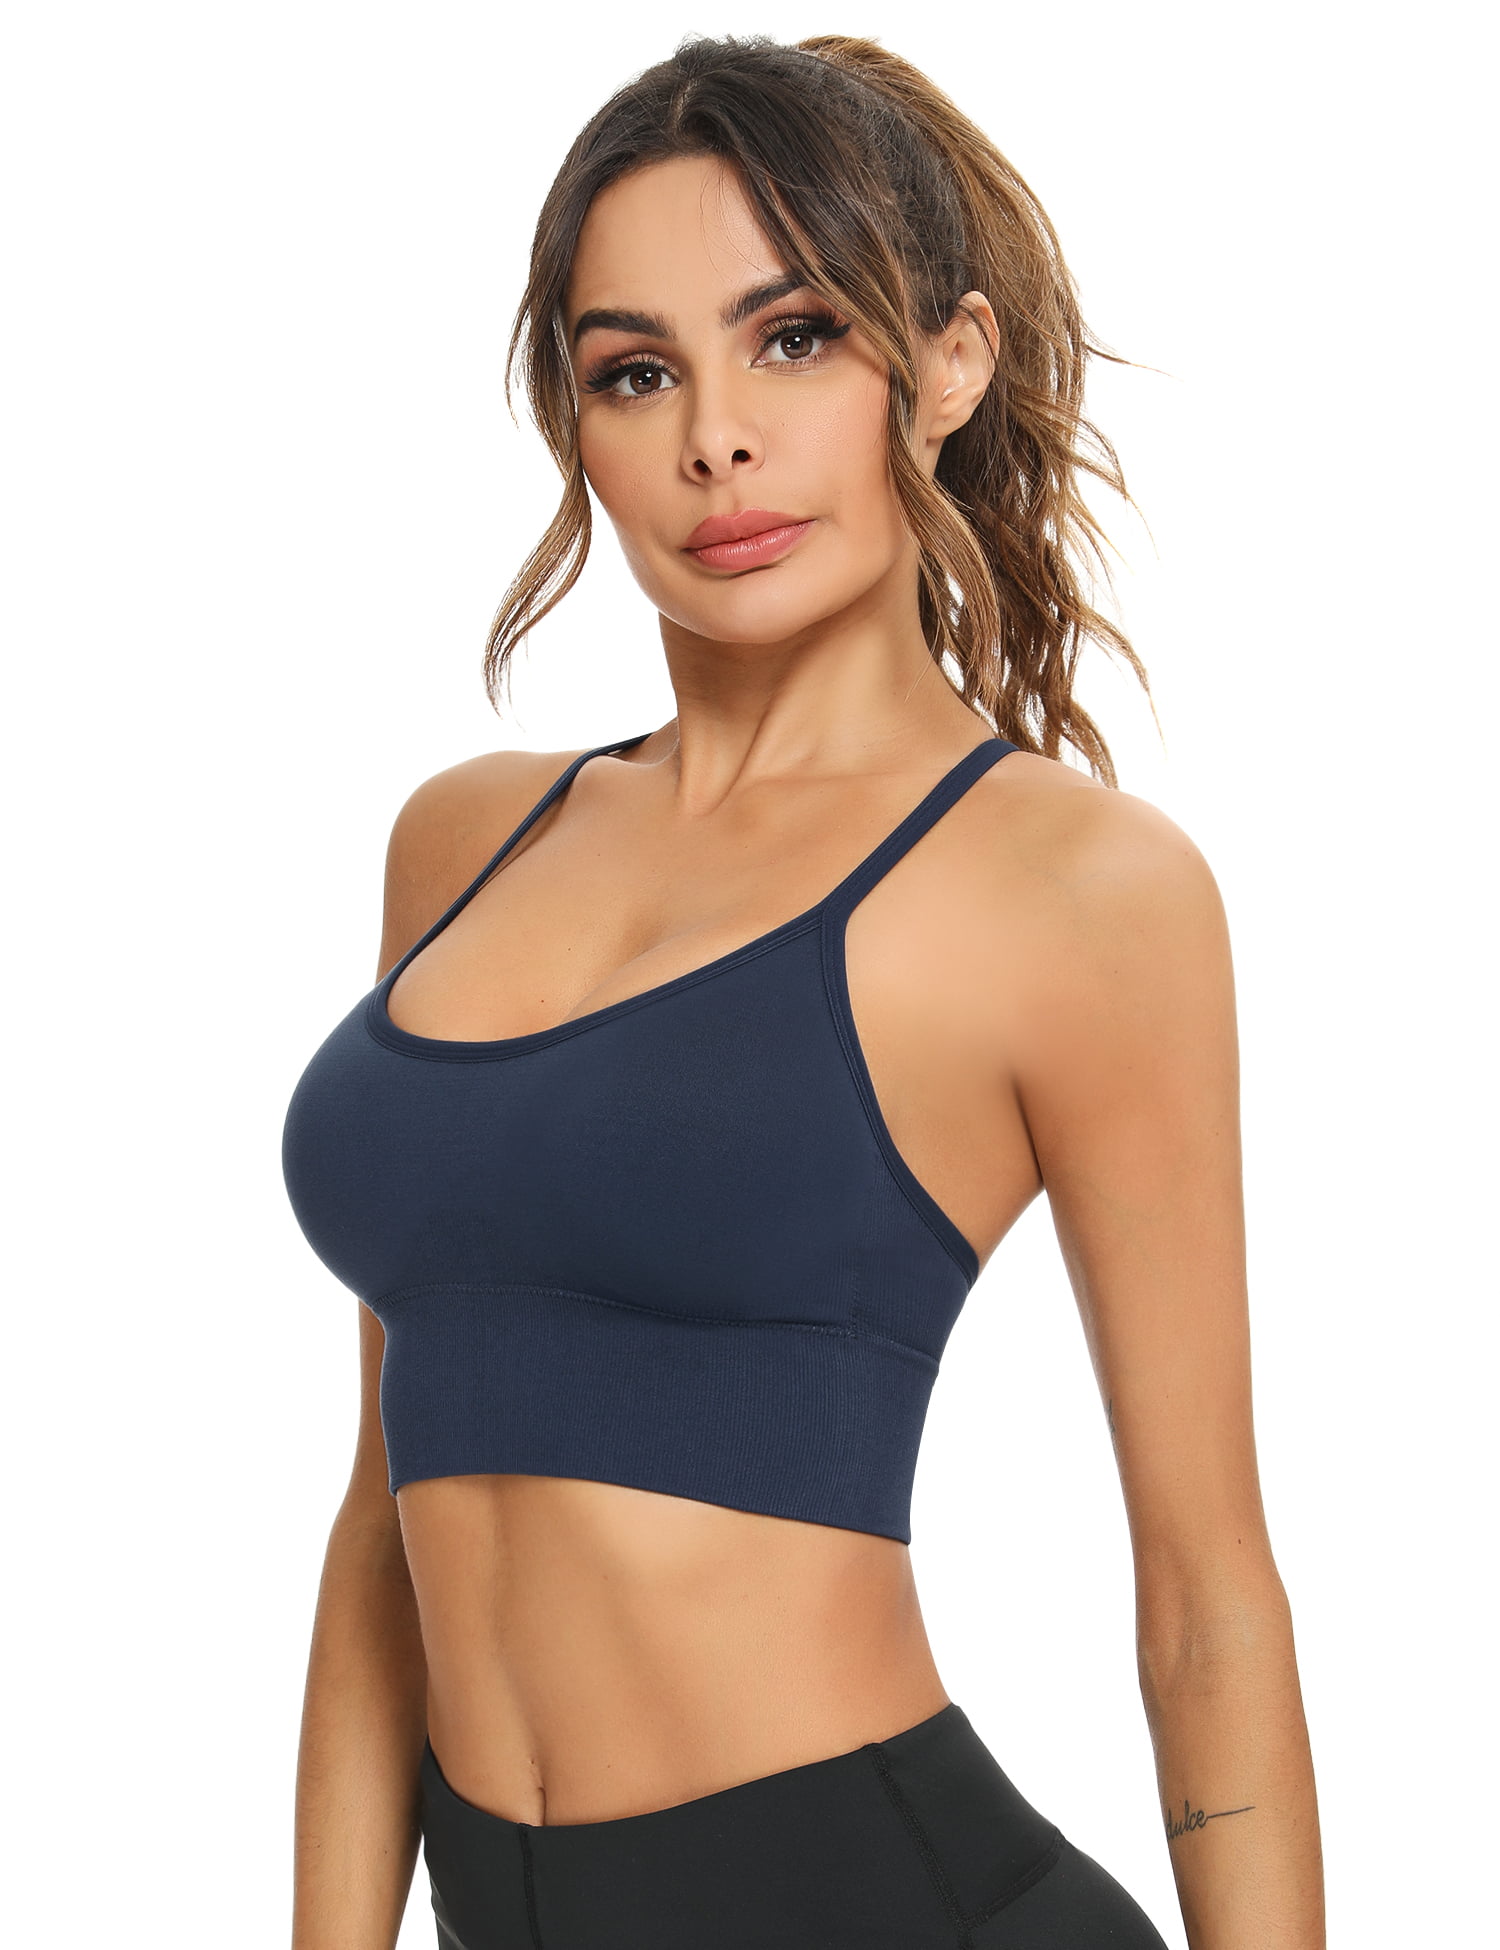 iClosam Womens Sports Bras Padded Seamless Activewear Fitness Bra Support for Yoga Gym Workout S-XL 